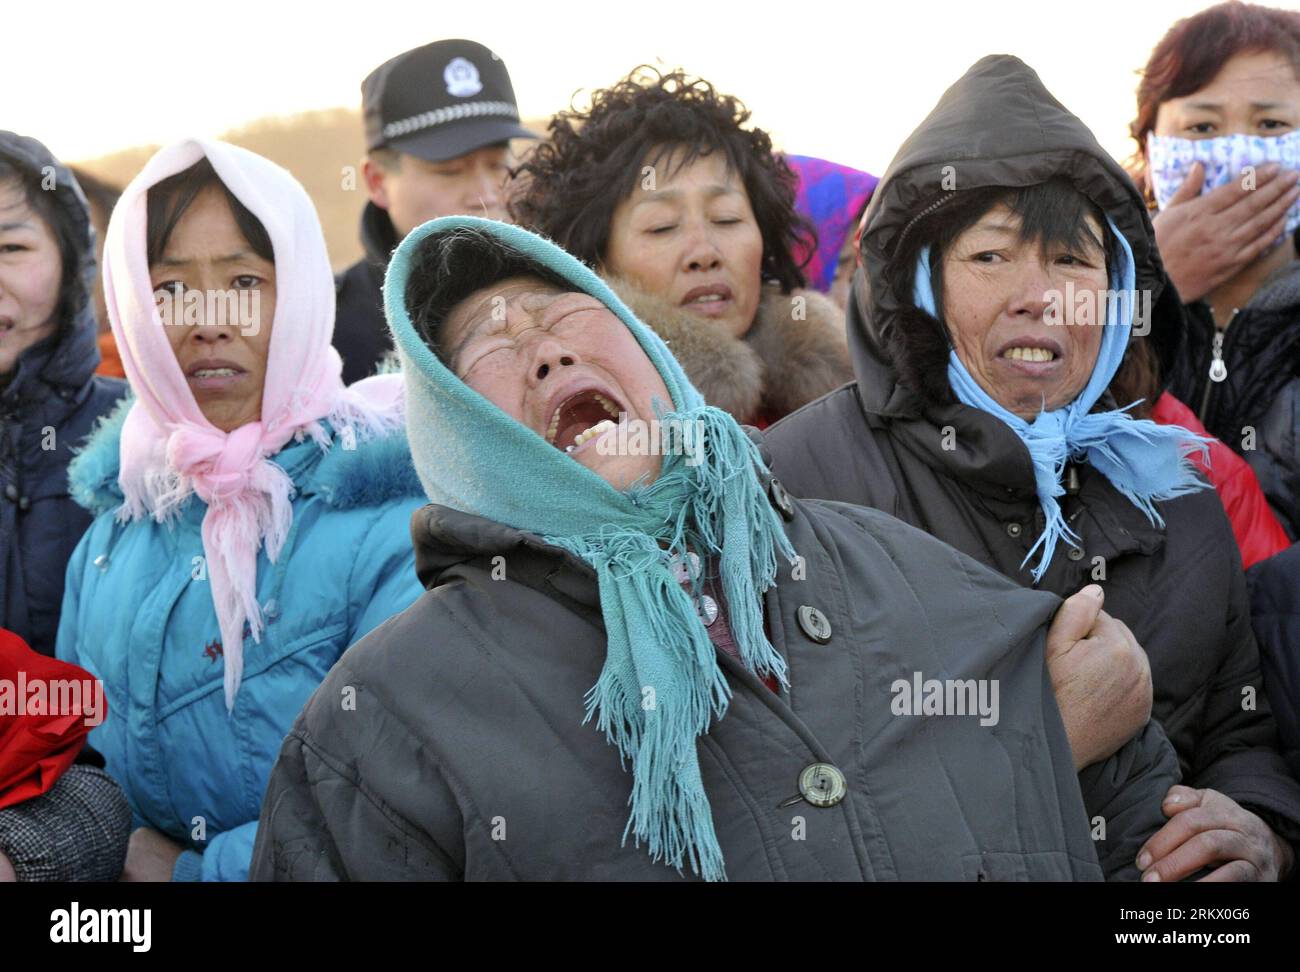 Bildnummer: 58842719  Datum: 28.11.2012  Copyright: imago/Xinhua (121128) -- DALIAN, Nov. 28, 2012 (Xinhua) -- Relatives of victims are seen at a port near which a fishing boat capsized and sank in Dalian, northeast China s Liaoning Province, Nov. 28, 2012. Twelve have been confirmed dead and four were still missing after a fishing boat, with 17 crew members on board, sank near a fishing port in Dalian on the early morning of Wednesday. The only person who was saved was in normal condition and under observation at a local hospital. (Xinhua) (lmm) CHINA-DALIAN-FISHING BOAT-ACCIDENT (CN) PUBLICA Stock Photo